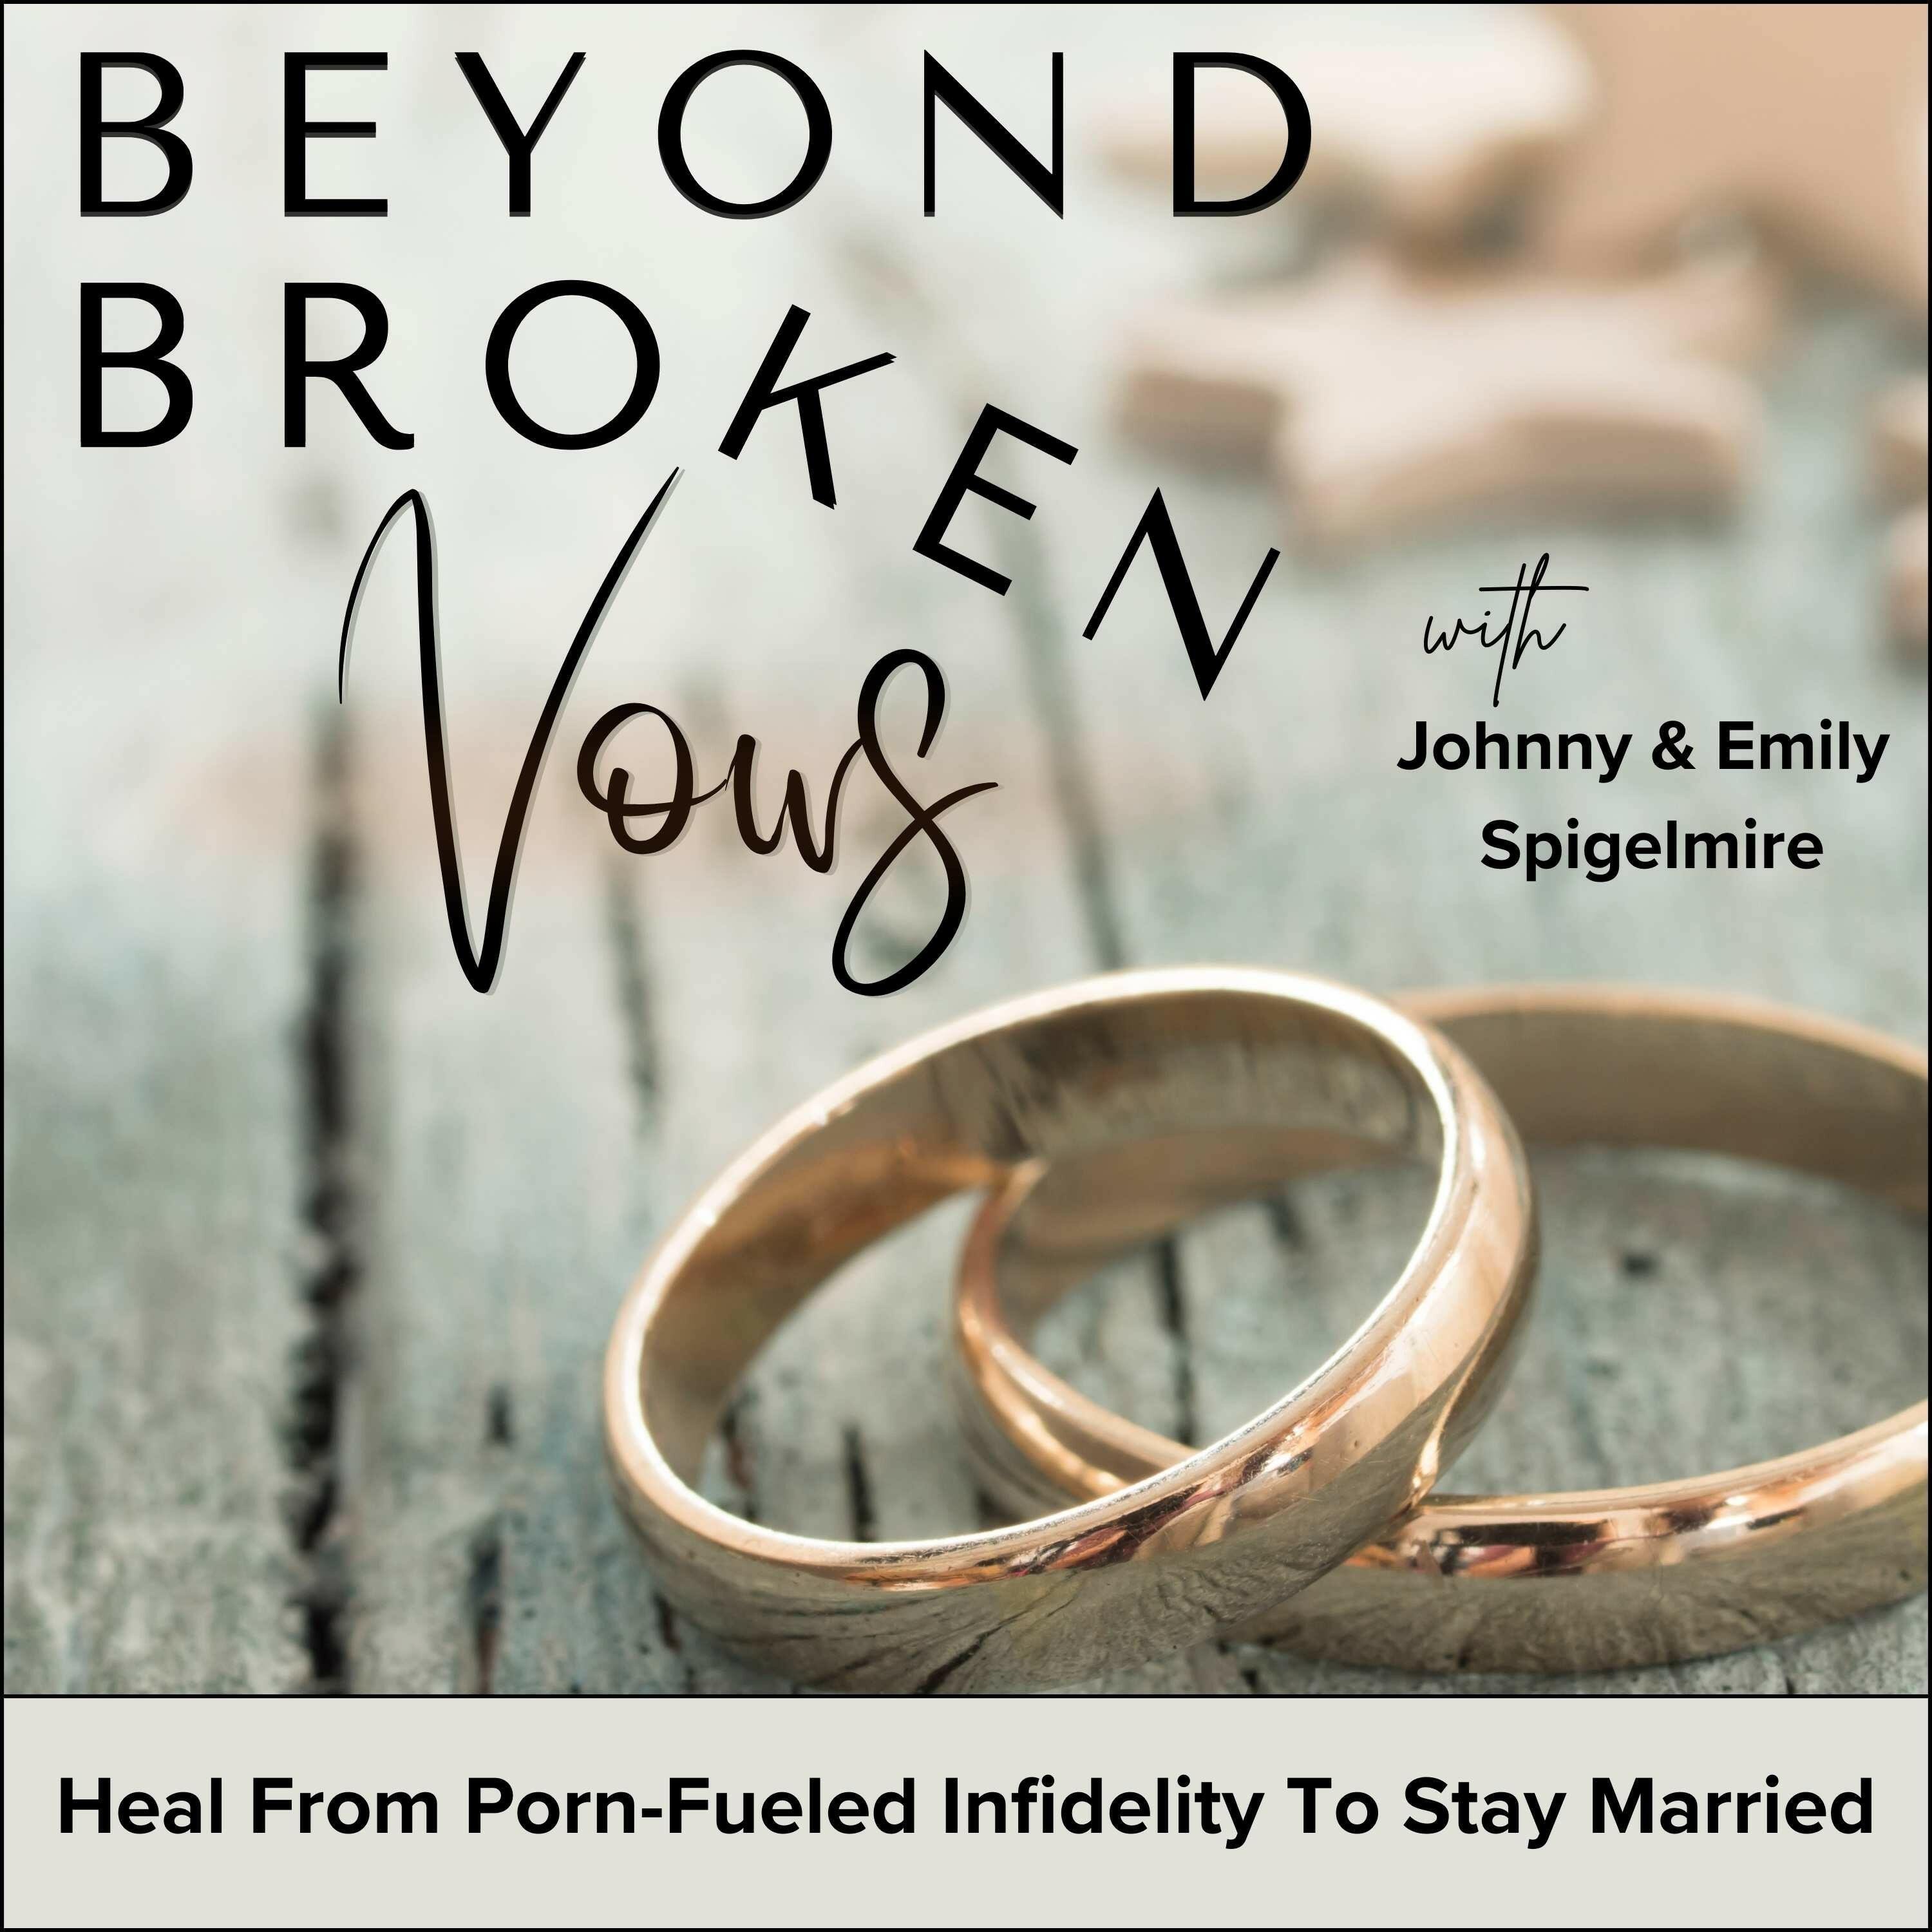 ♫ Beyond Broken Vows Christian Marriage, Adultery, Pornography Addiction, Sexual Betrayal, Intimacy *****Top 5% Global Podcast***** Dear Betrayed, Are you in shock? Confused, devastated, hurt, angry and feeling like